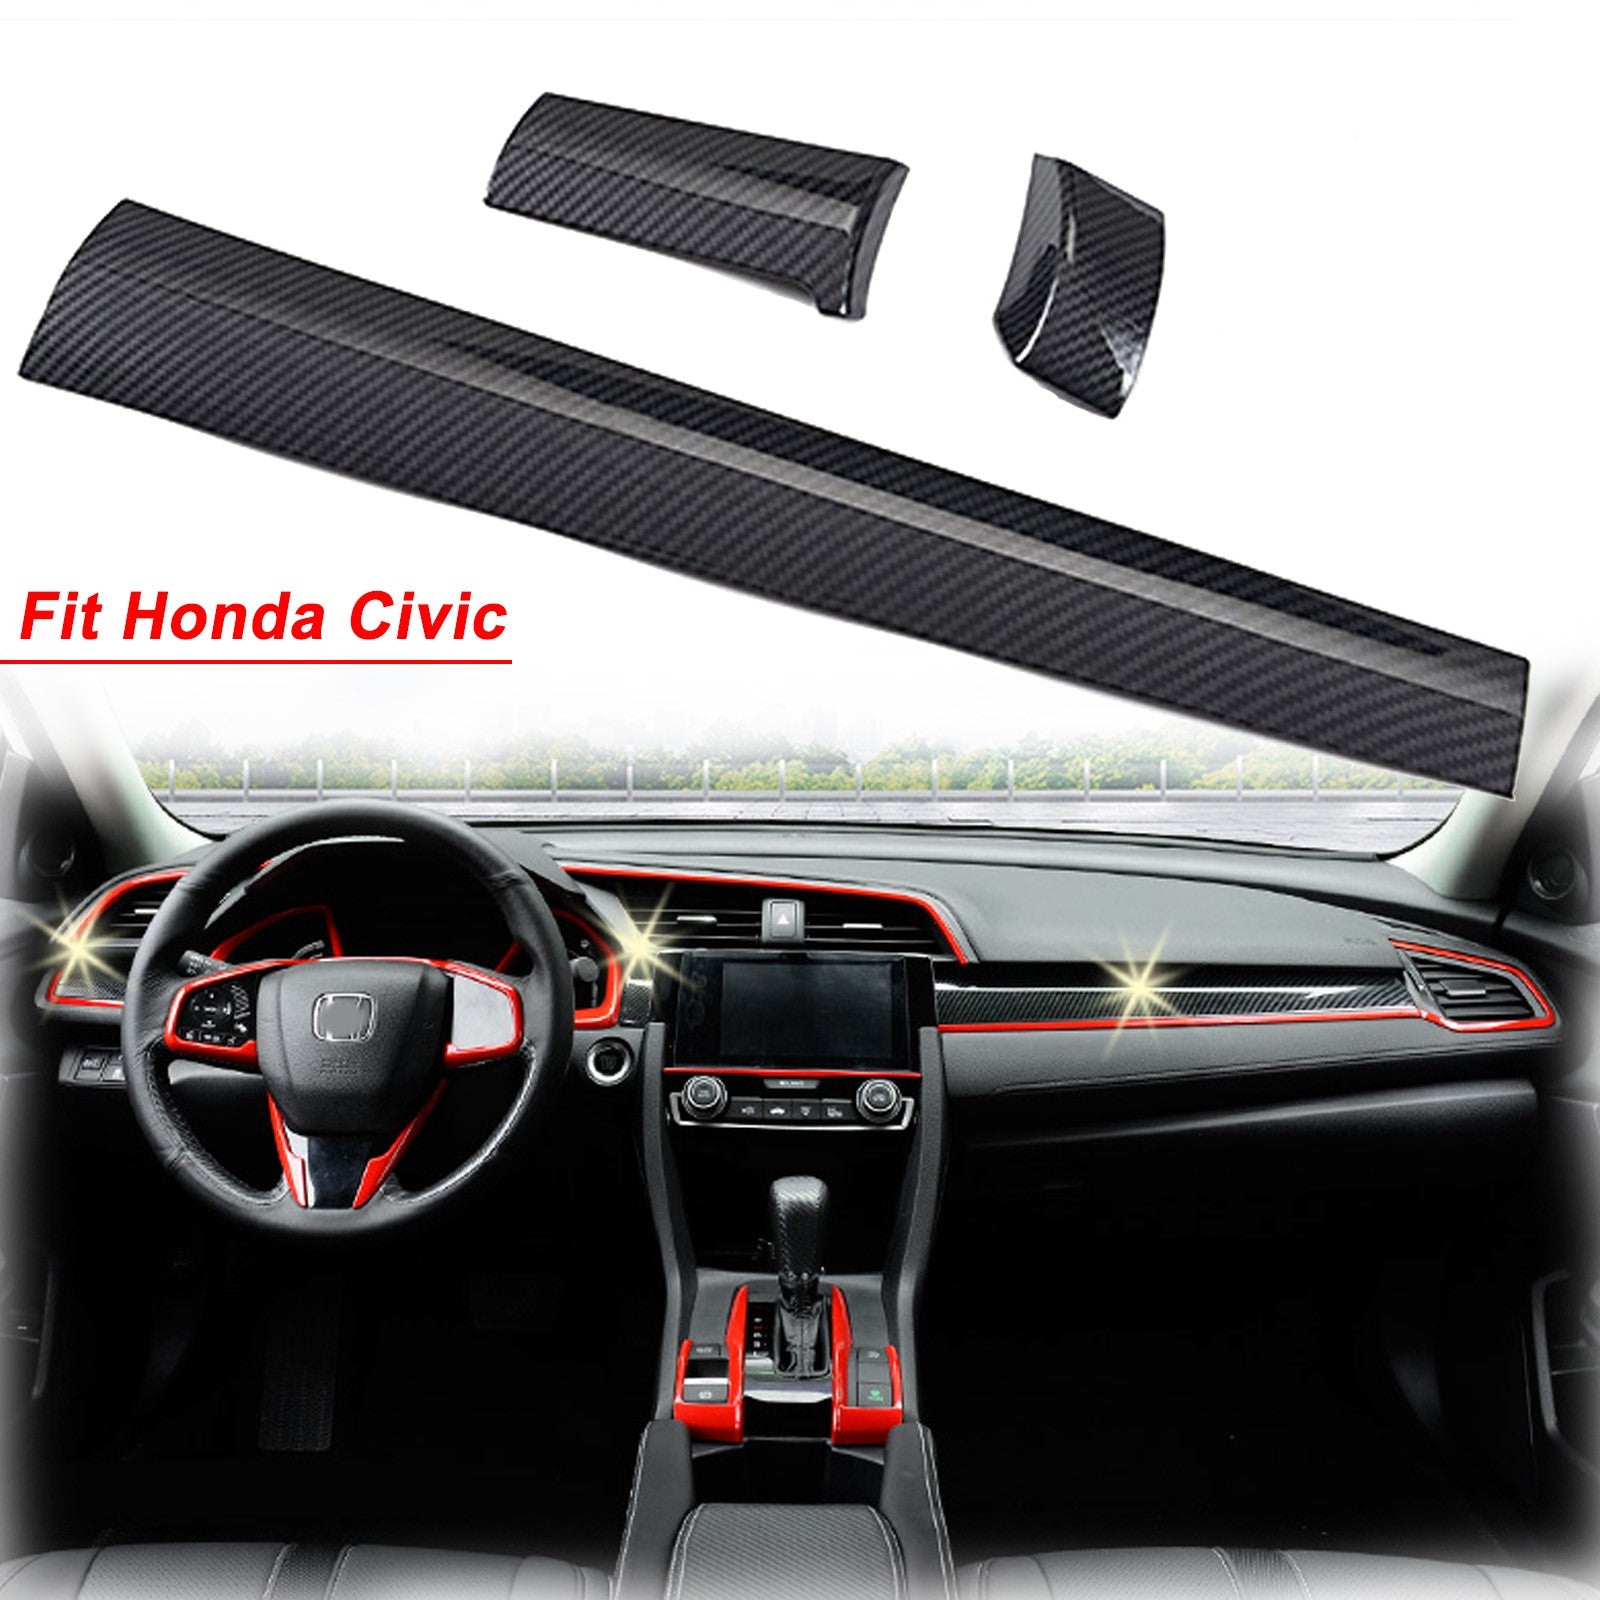  Great-luck ABS Plastic Dashboard Cover,Dash Cover Custom,  Interior accessories Decaration Sticker 1Pcs/Set(Carbon Fiber Style) for  Honda 10th Civic(2016 2017 2018 2019 2020) Civic Hatchback/Type R :  Automotive